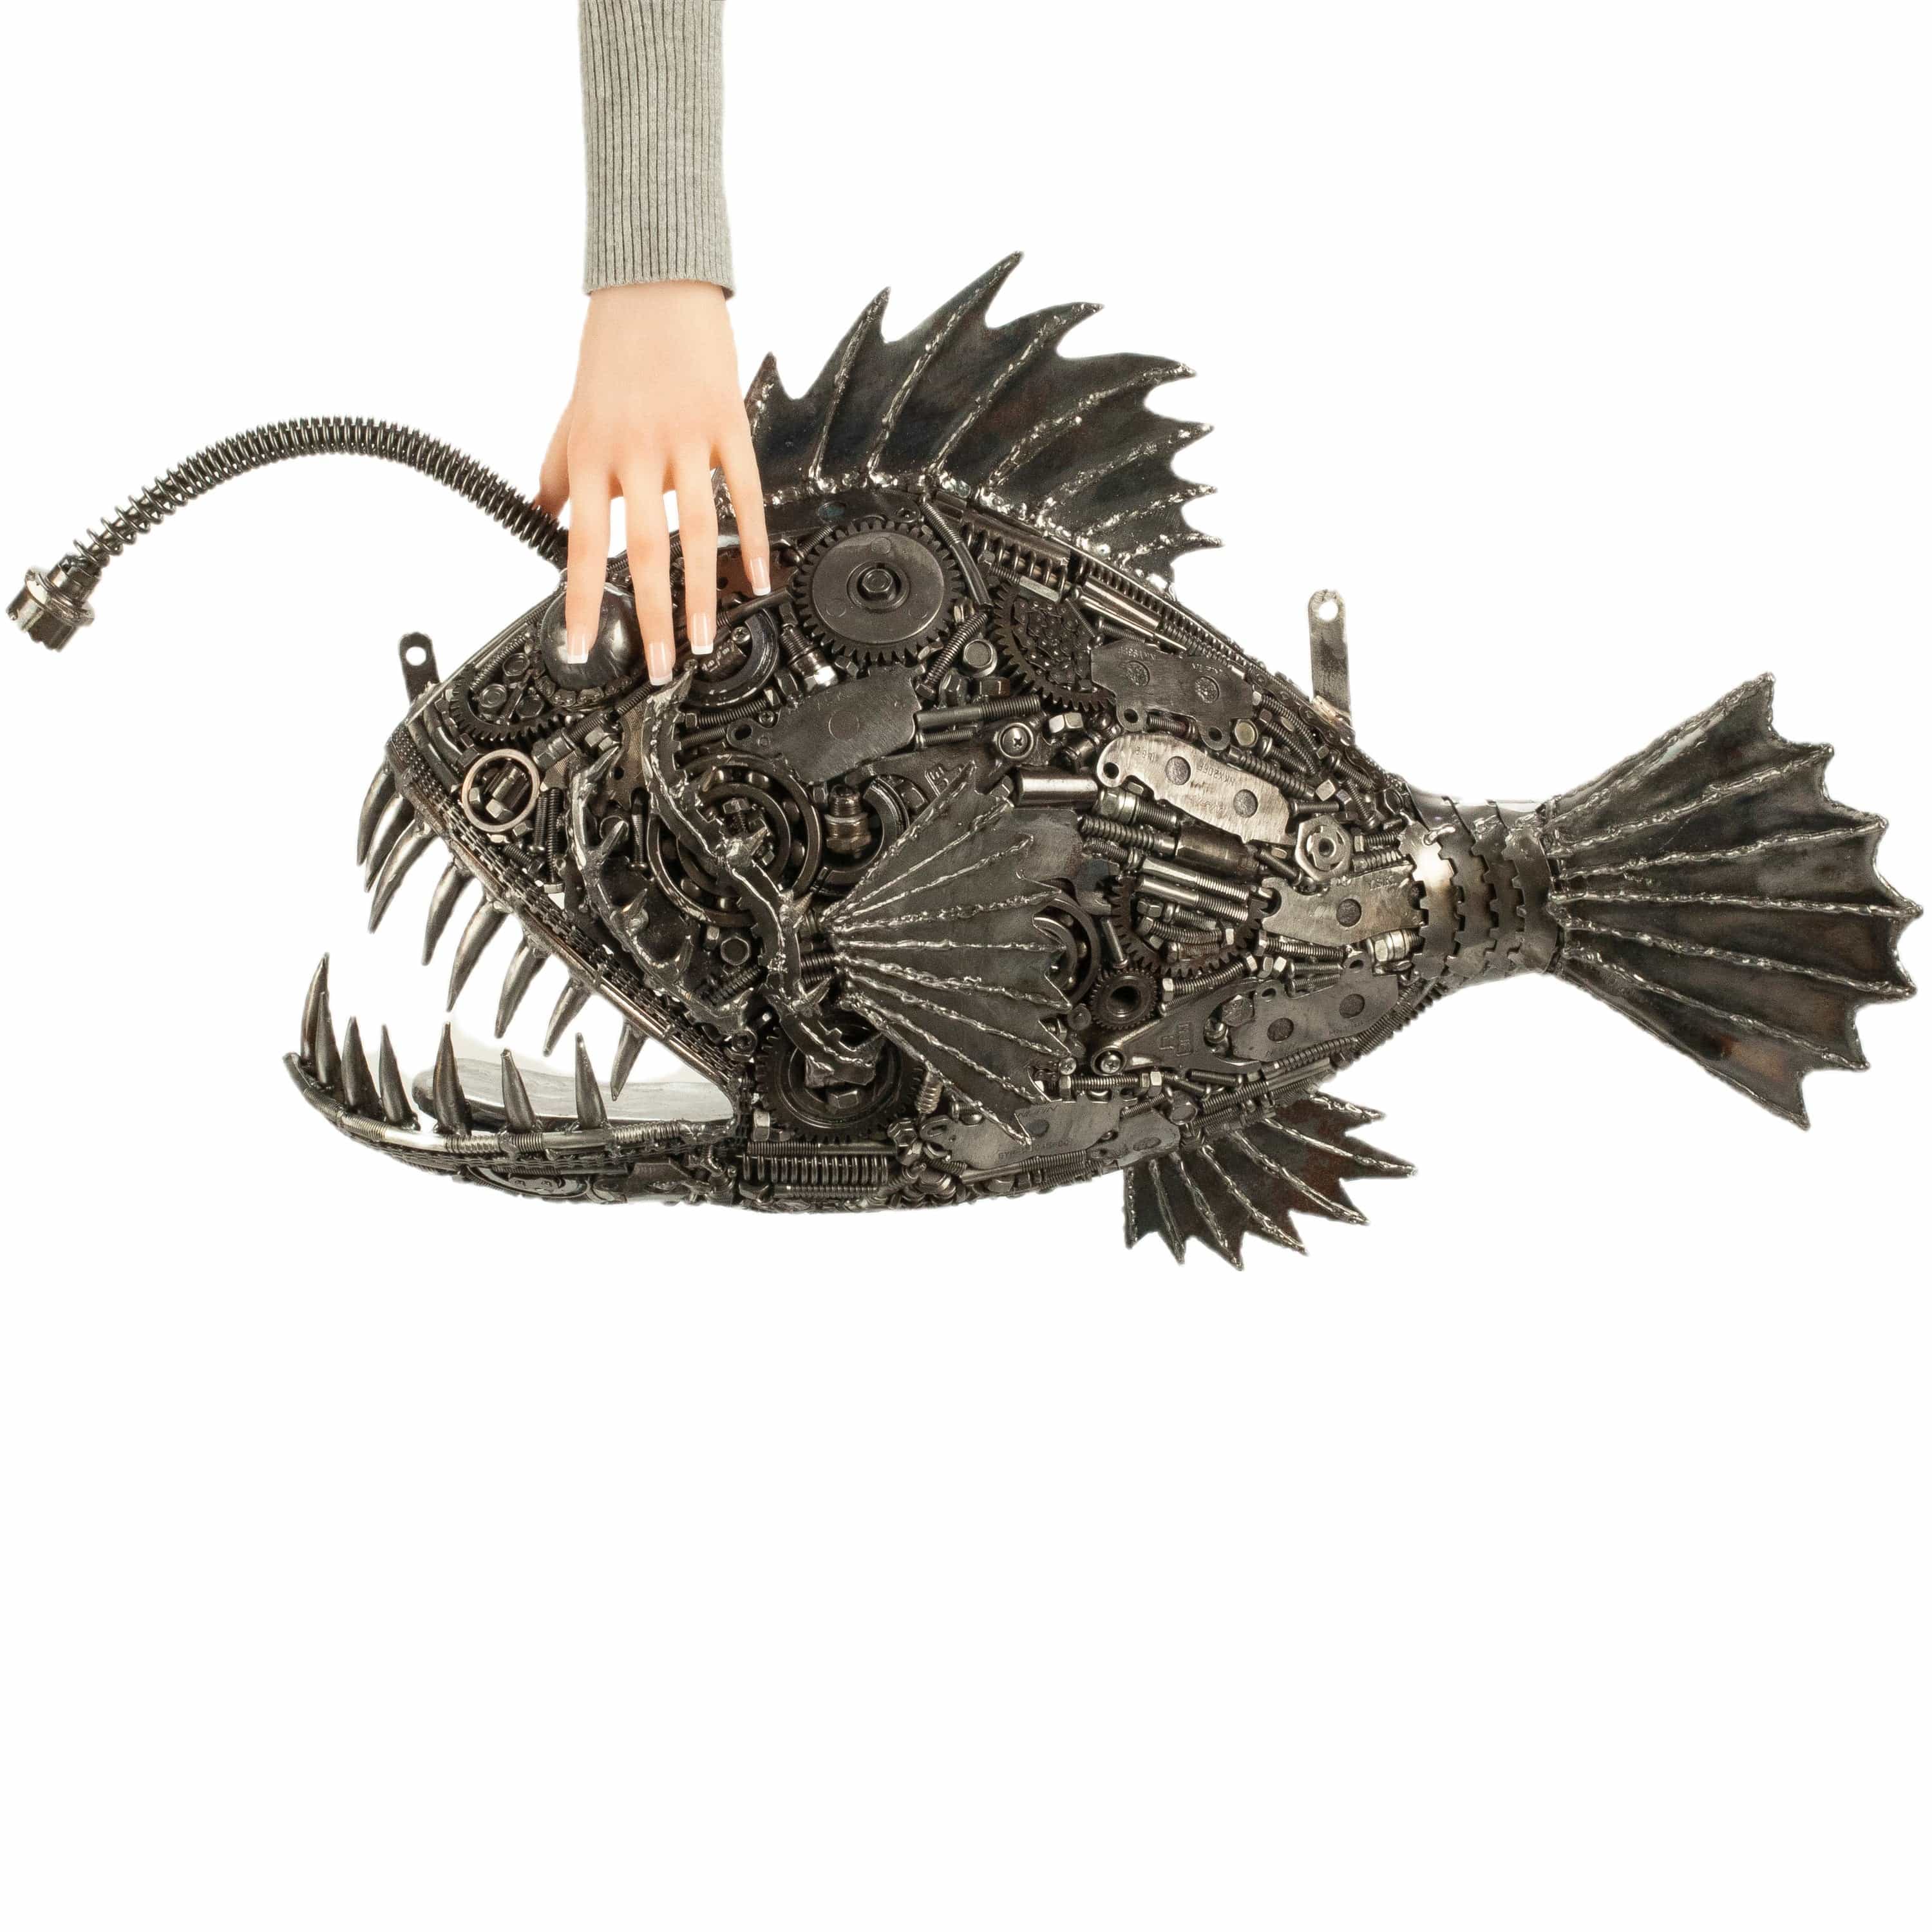 KALIFANO Recycled Metal Art 28" Anglerfish (Left) Inspired Recycled Metal Art Sculpture RMS-AFL70x50-PK